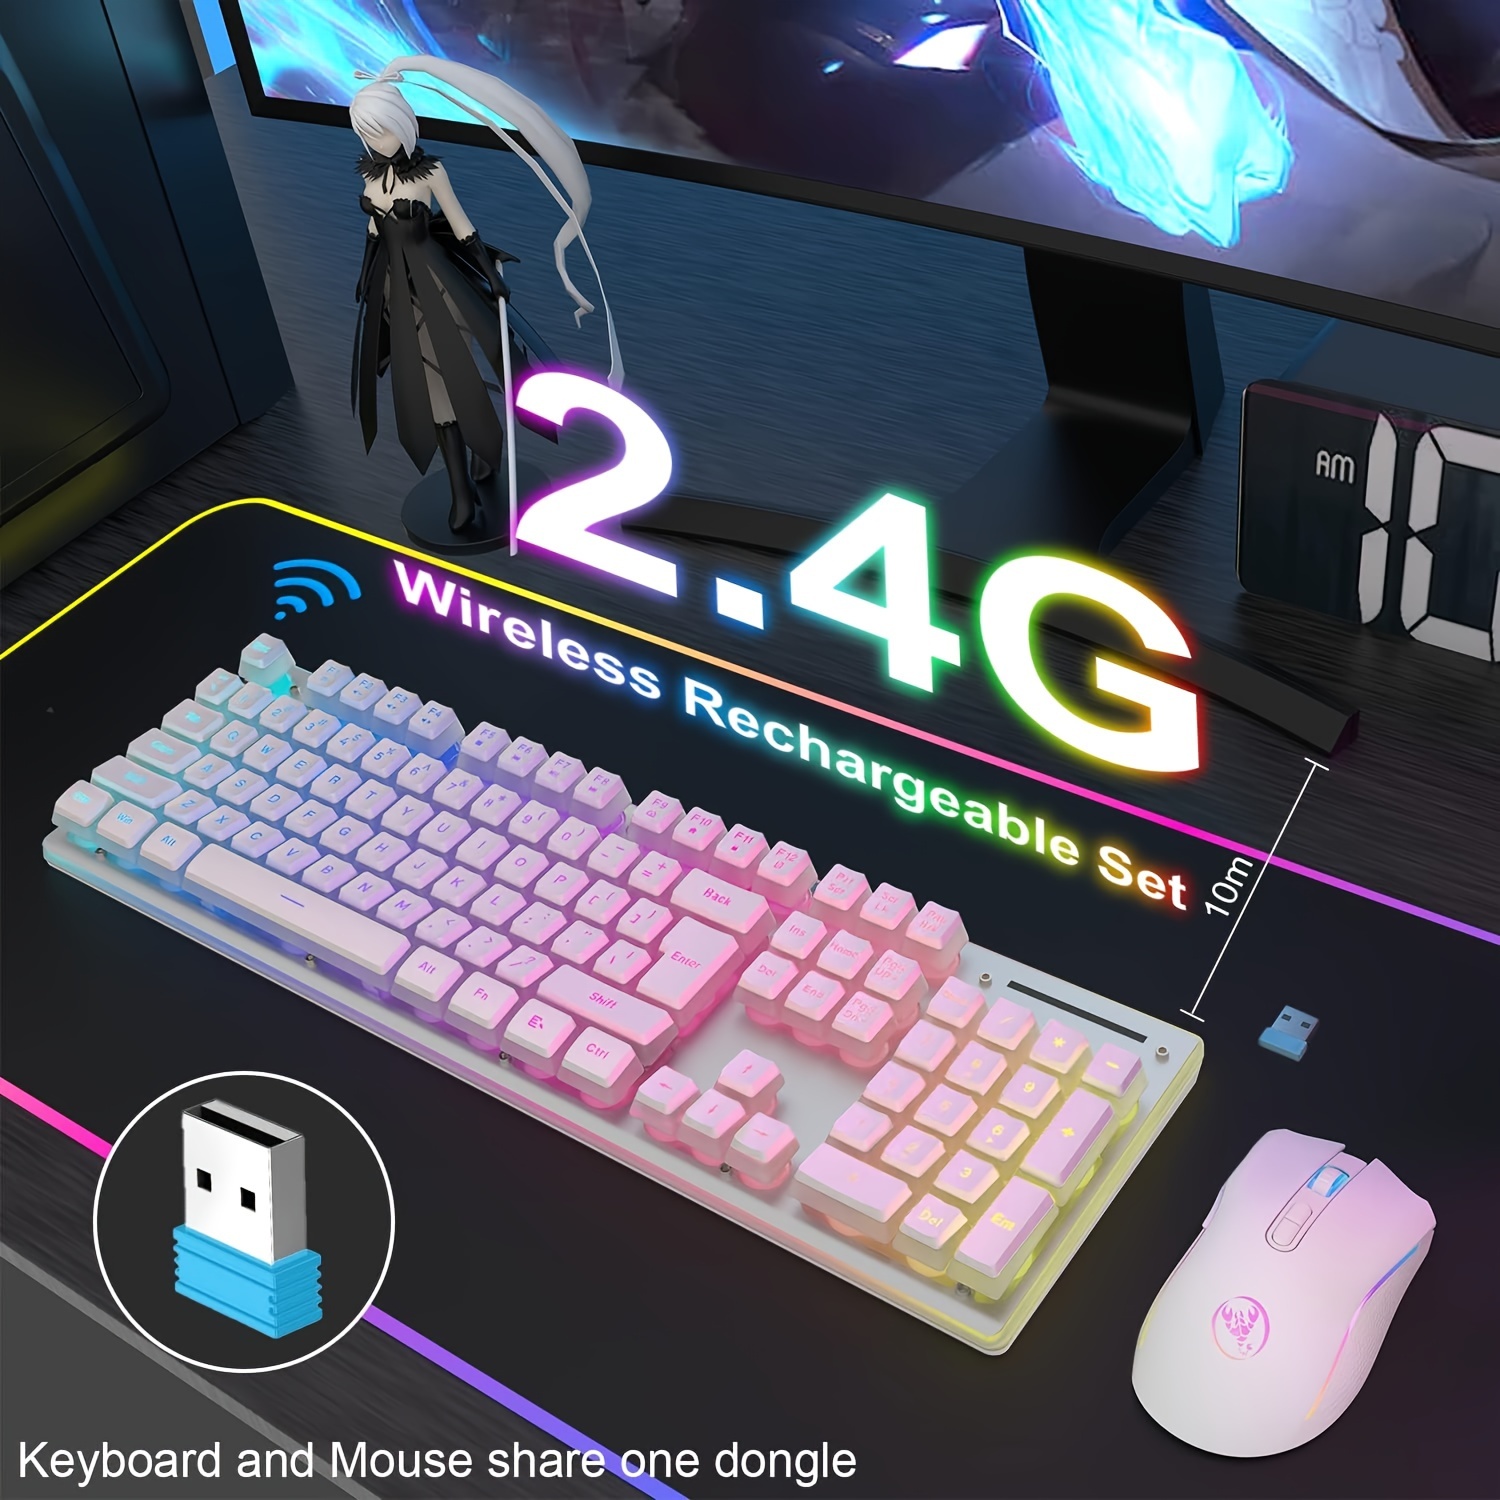 

Wireless Gaming Keyboard And Mouse Combo, Translucent Pudding Keycap, 3650mah Rechargeable Battery, Rgb Ergonomic Mechanical Feel Keyboard, 4800 Dpi Rainbow Led Mute Mouse 2.4g Usb For Pc/